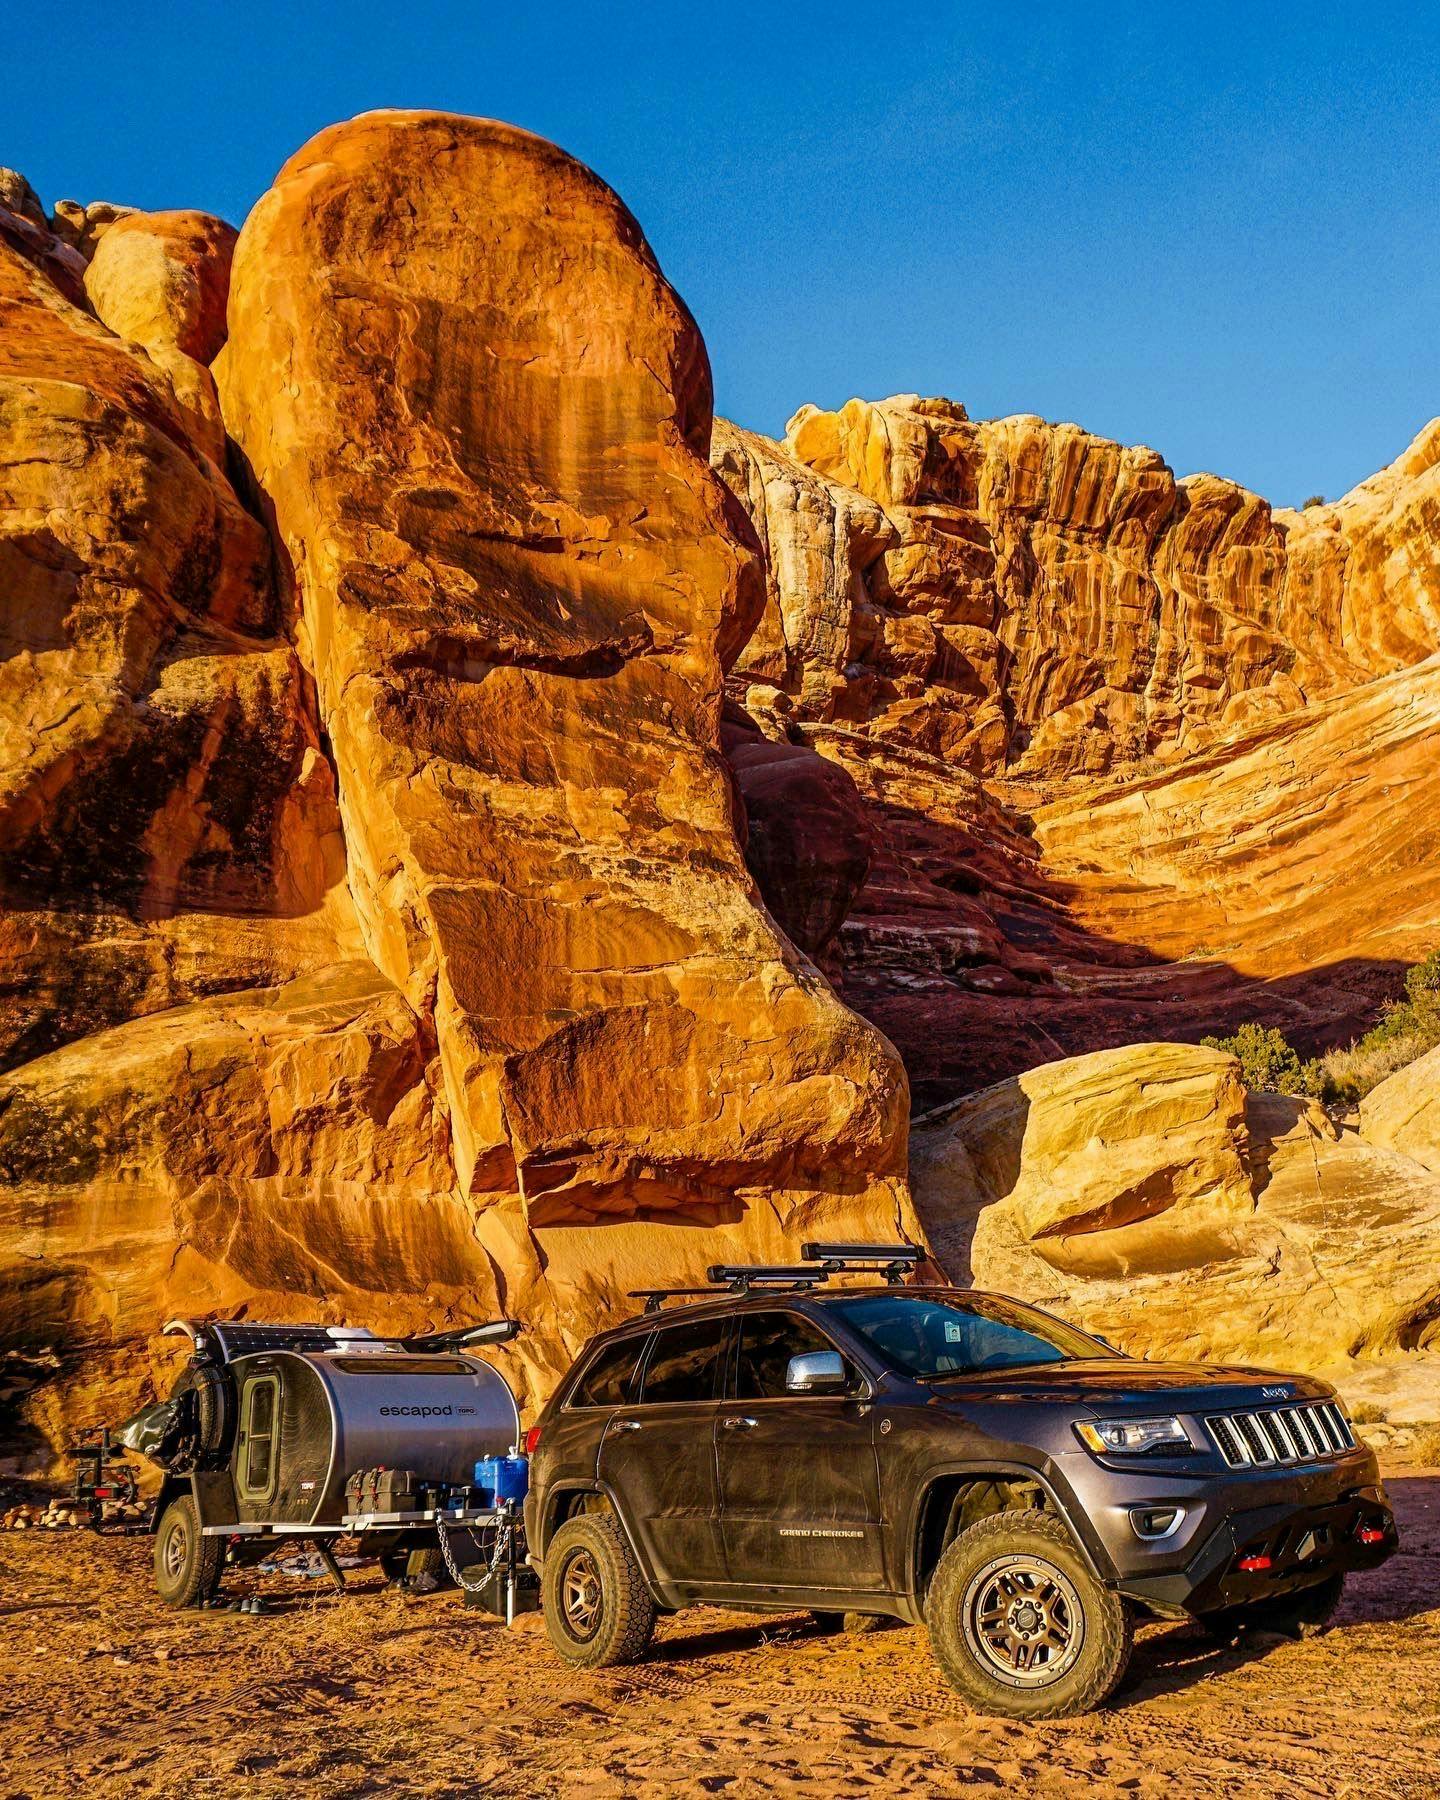 A Jeep towing an Escapod teardrop camper is nestled beneath glowing red rock in Thompson Springs, Utah.